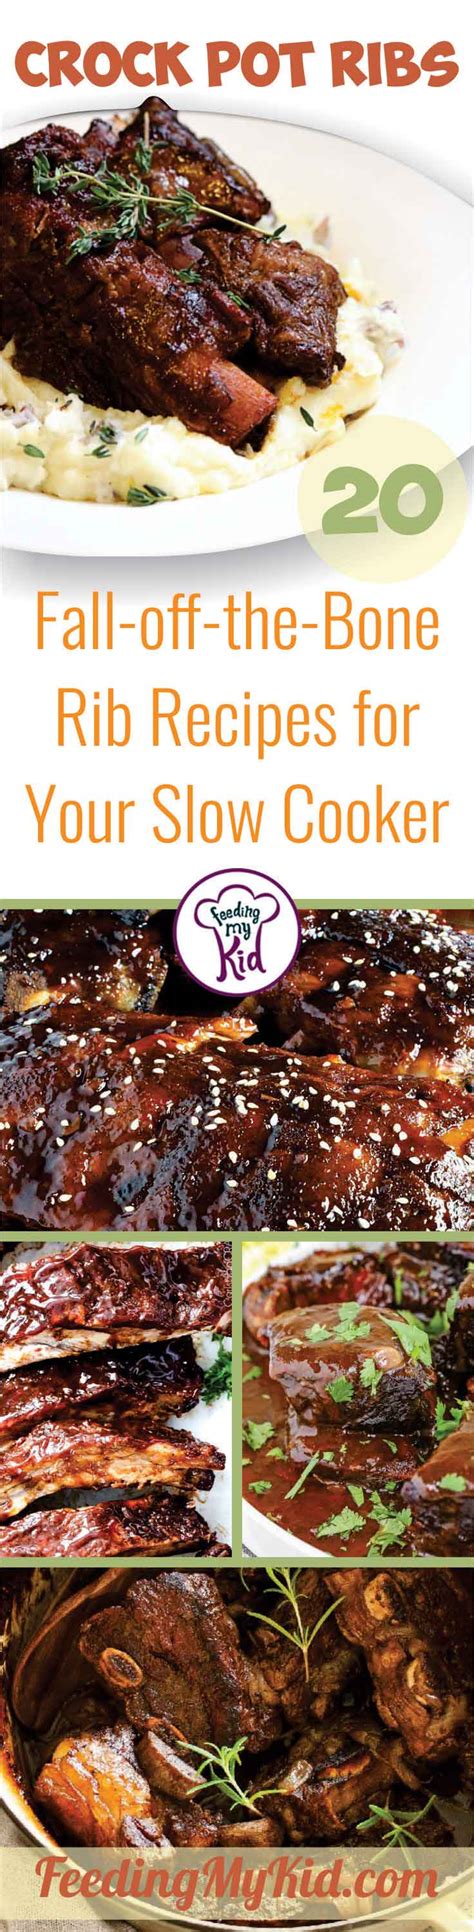 I never buy a prime rib with bones, it seems like a waste of money to me. Crockpot Ribs: 20 Fall-off-the-Bone Rib Recipes for Your ...